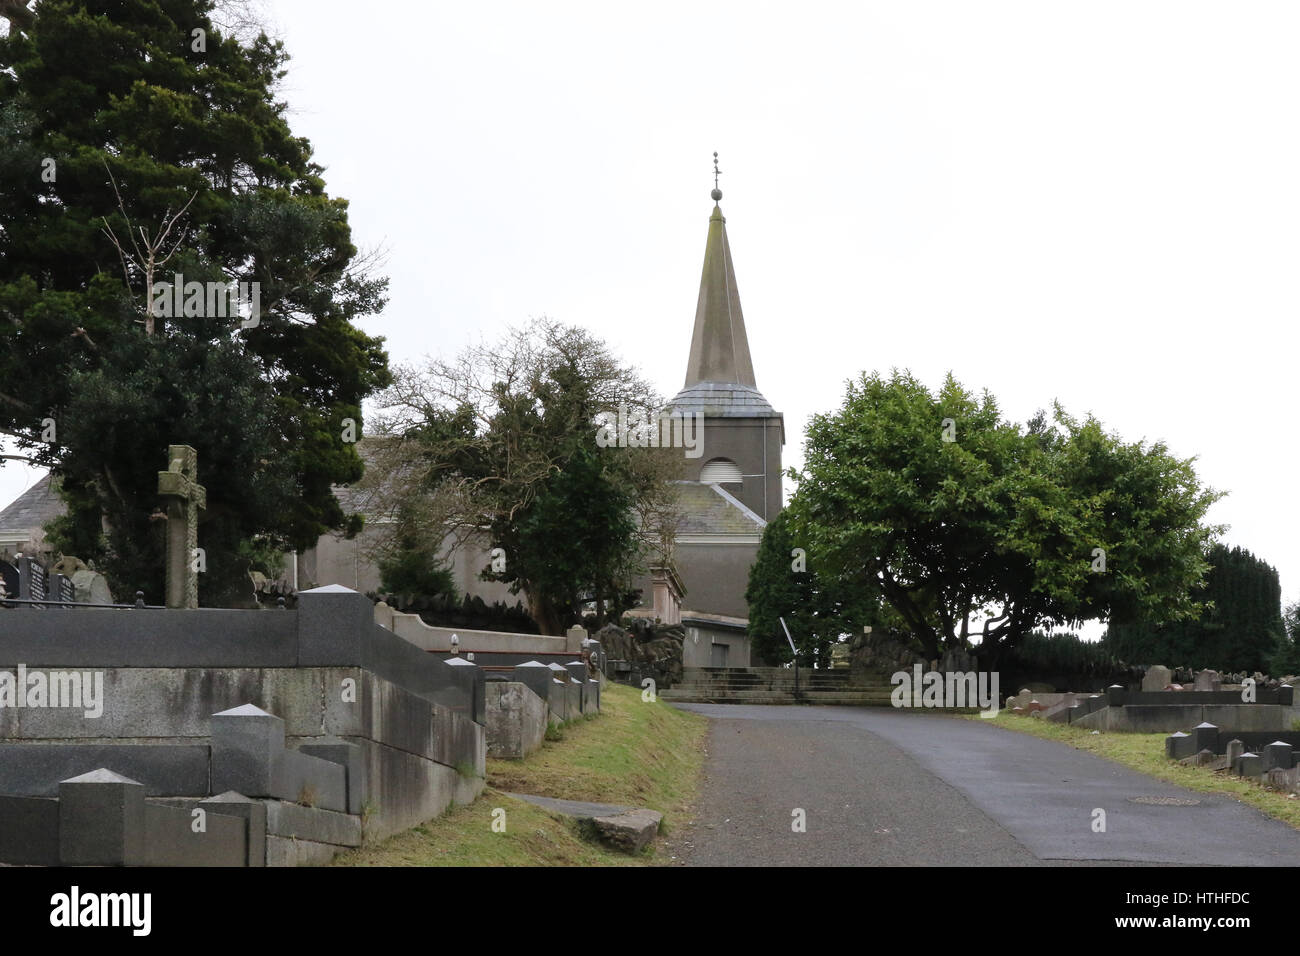 Knockbreda Cemetery in Belfast, Northern Ireland. The cemetery is connected to Knockbrdea Parish Church built in the early eightteenth century. Stock Photo